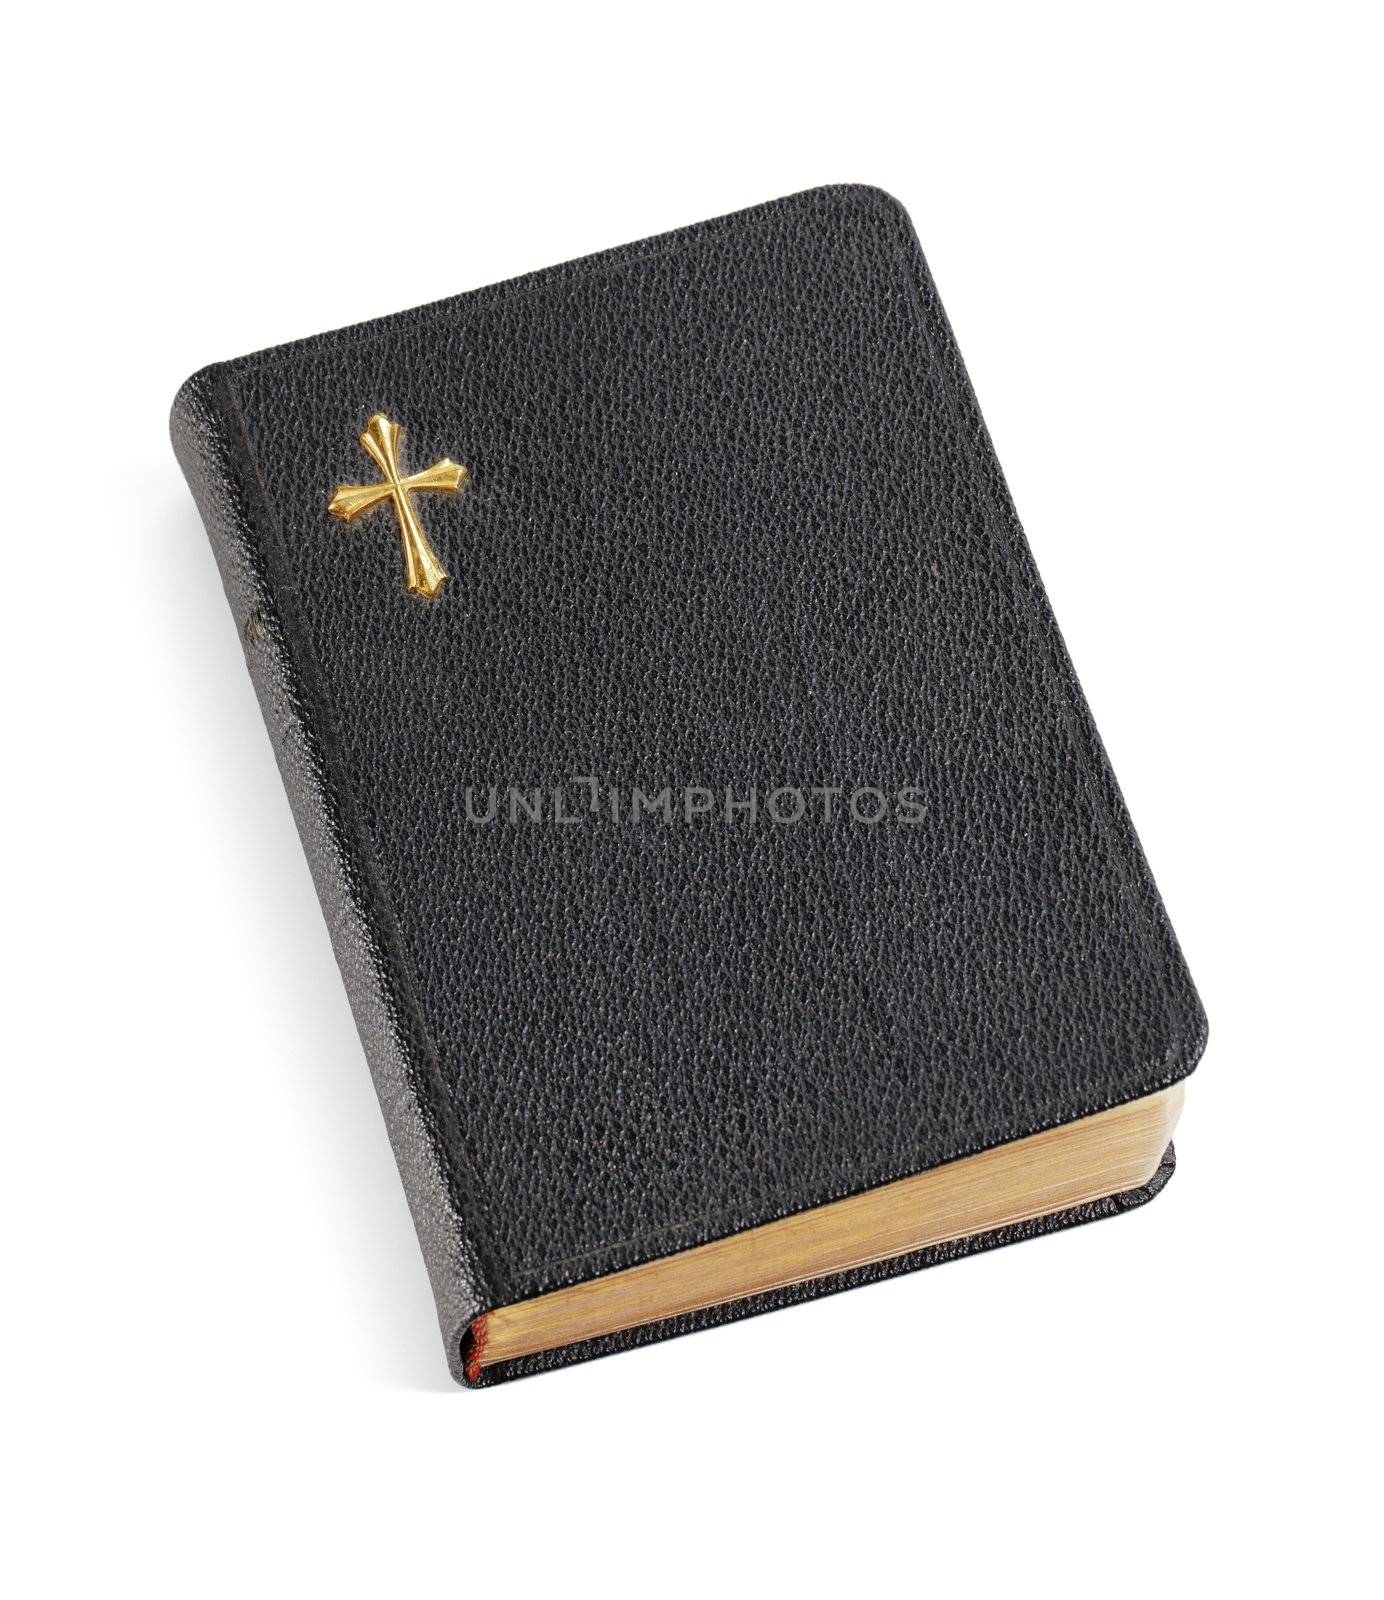 Bible by Stocksnapper